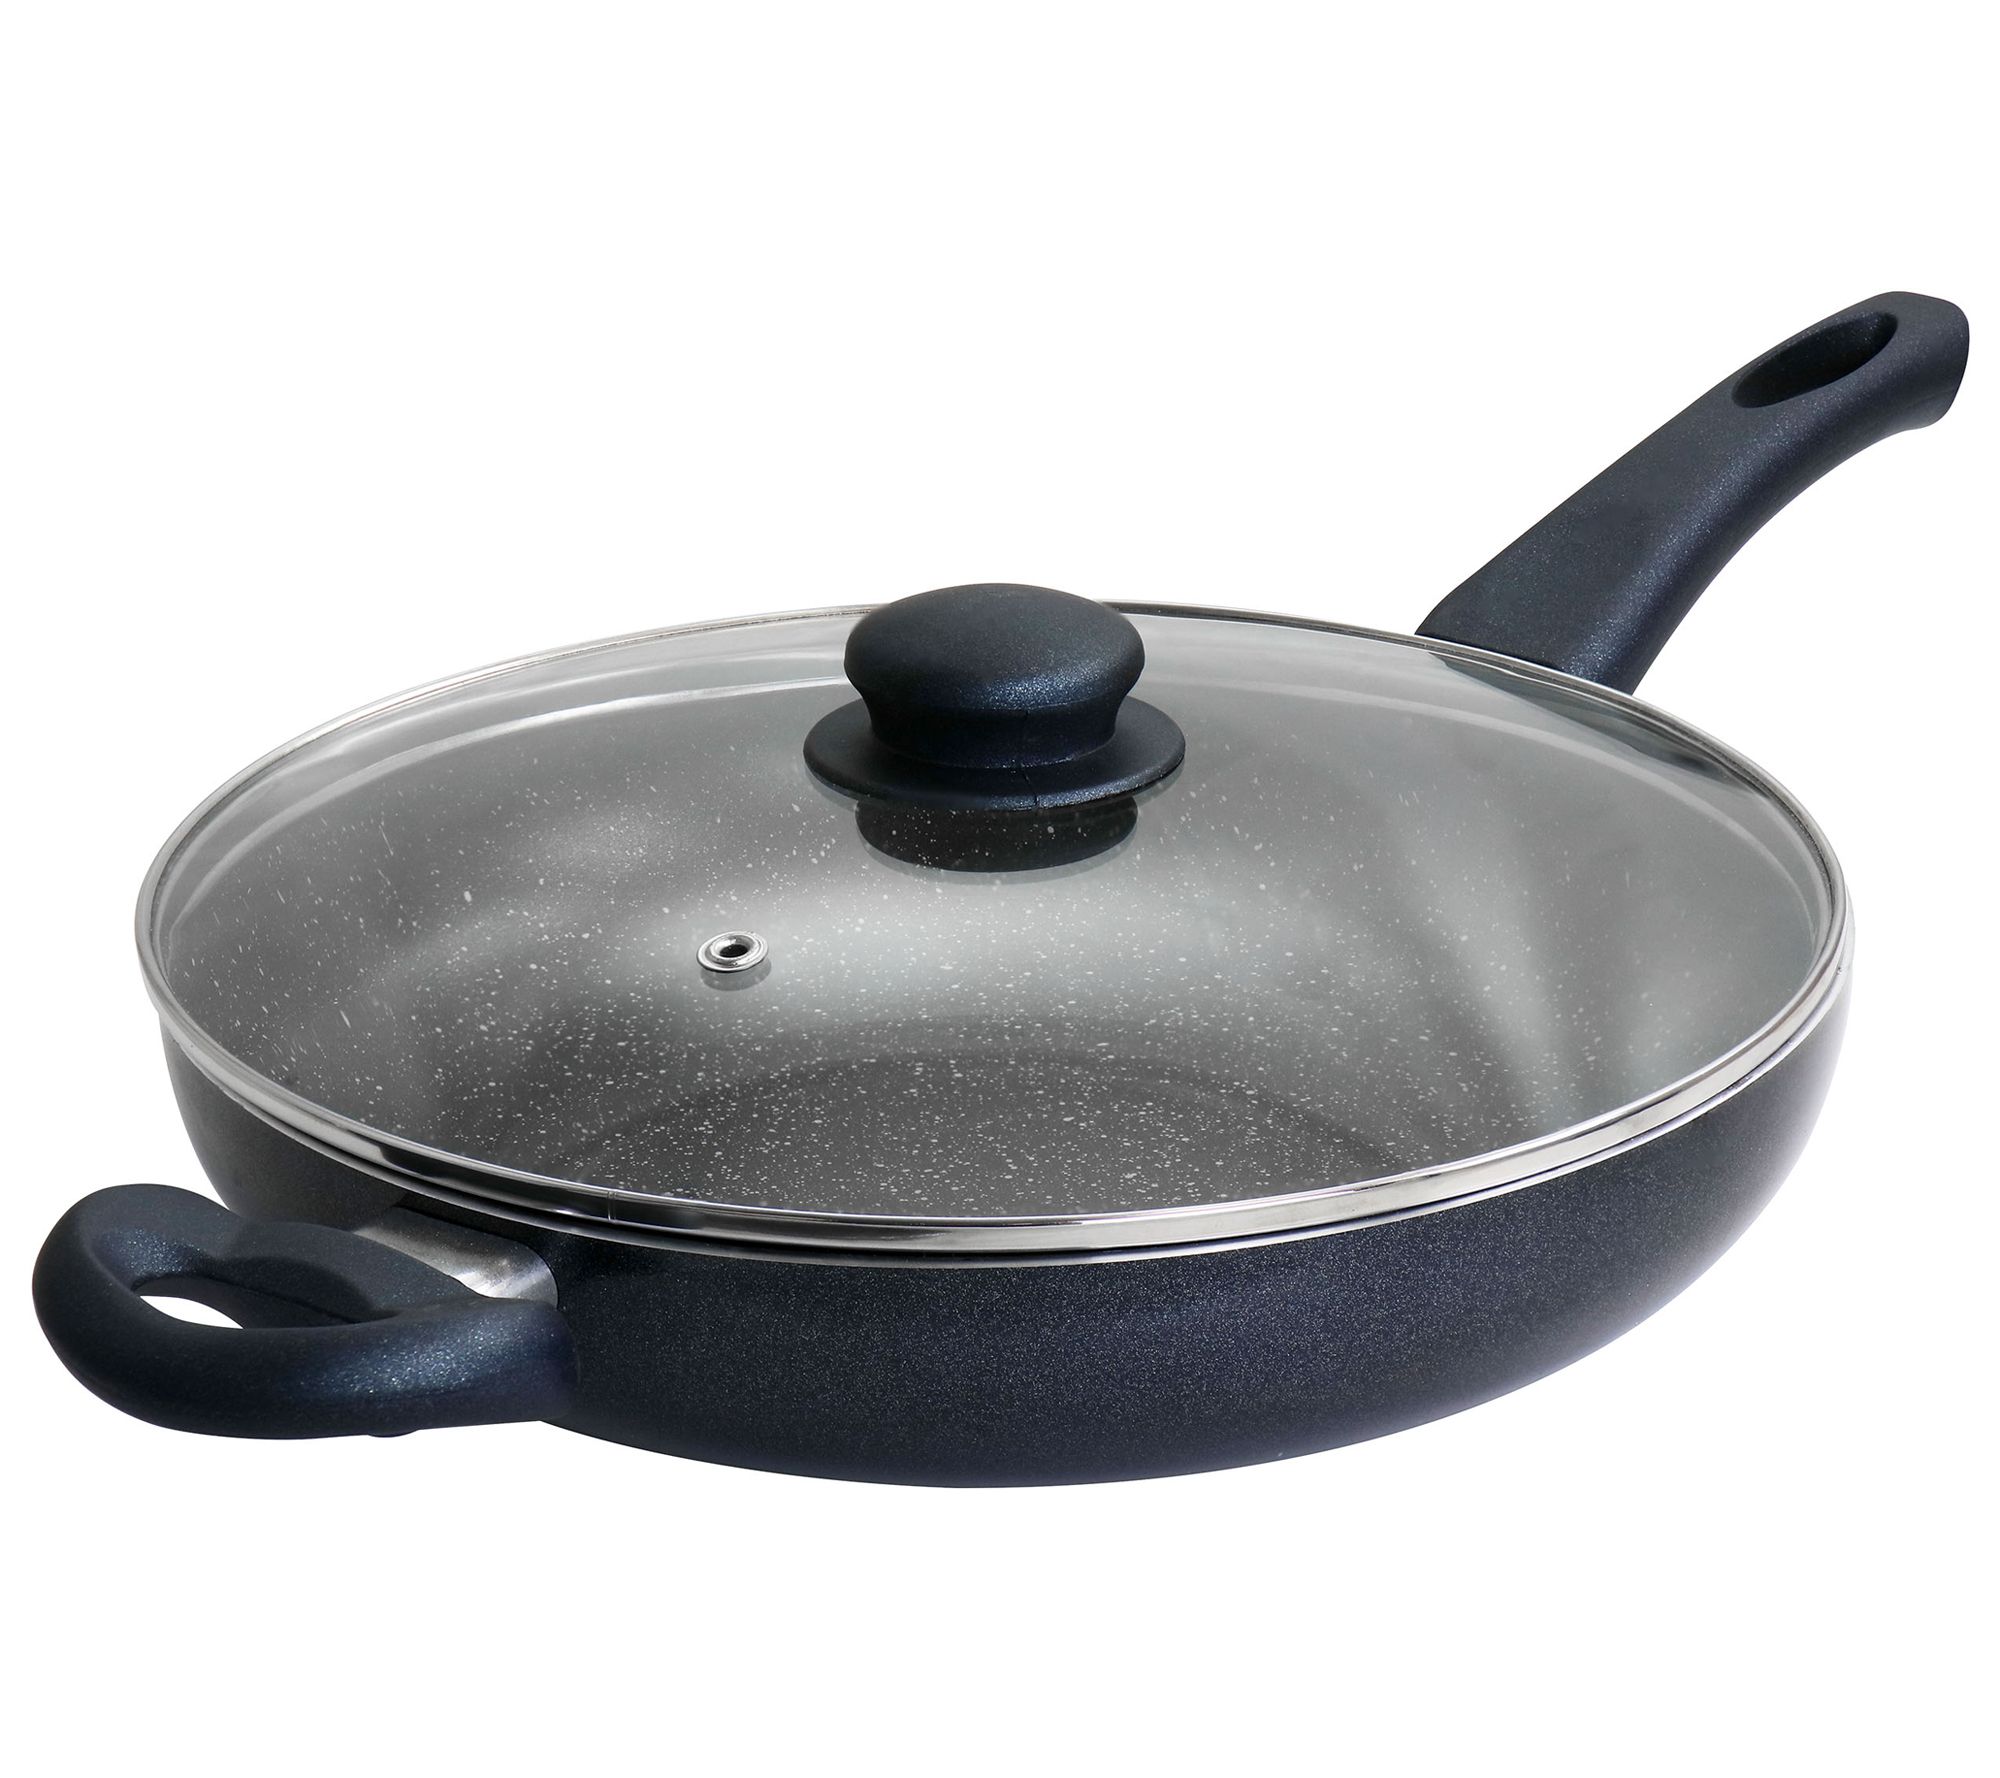 Oster Rigby 12 in. Aluminum Nonstick Frying Pan in Green with Pouring Spouts